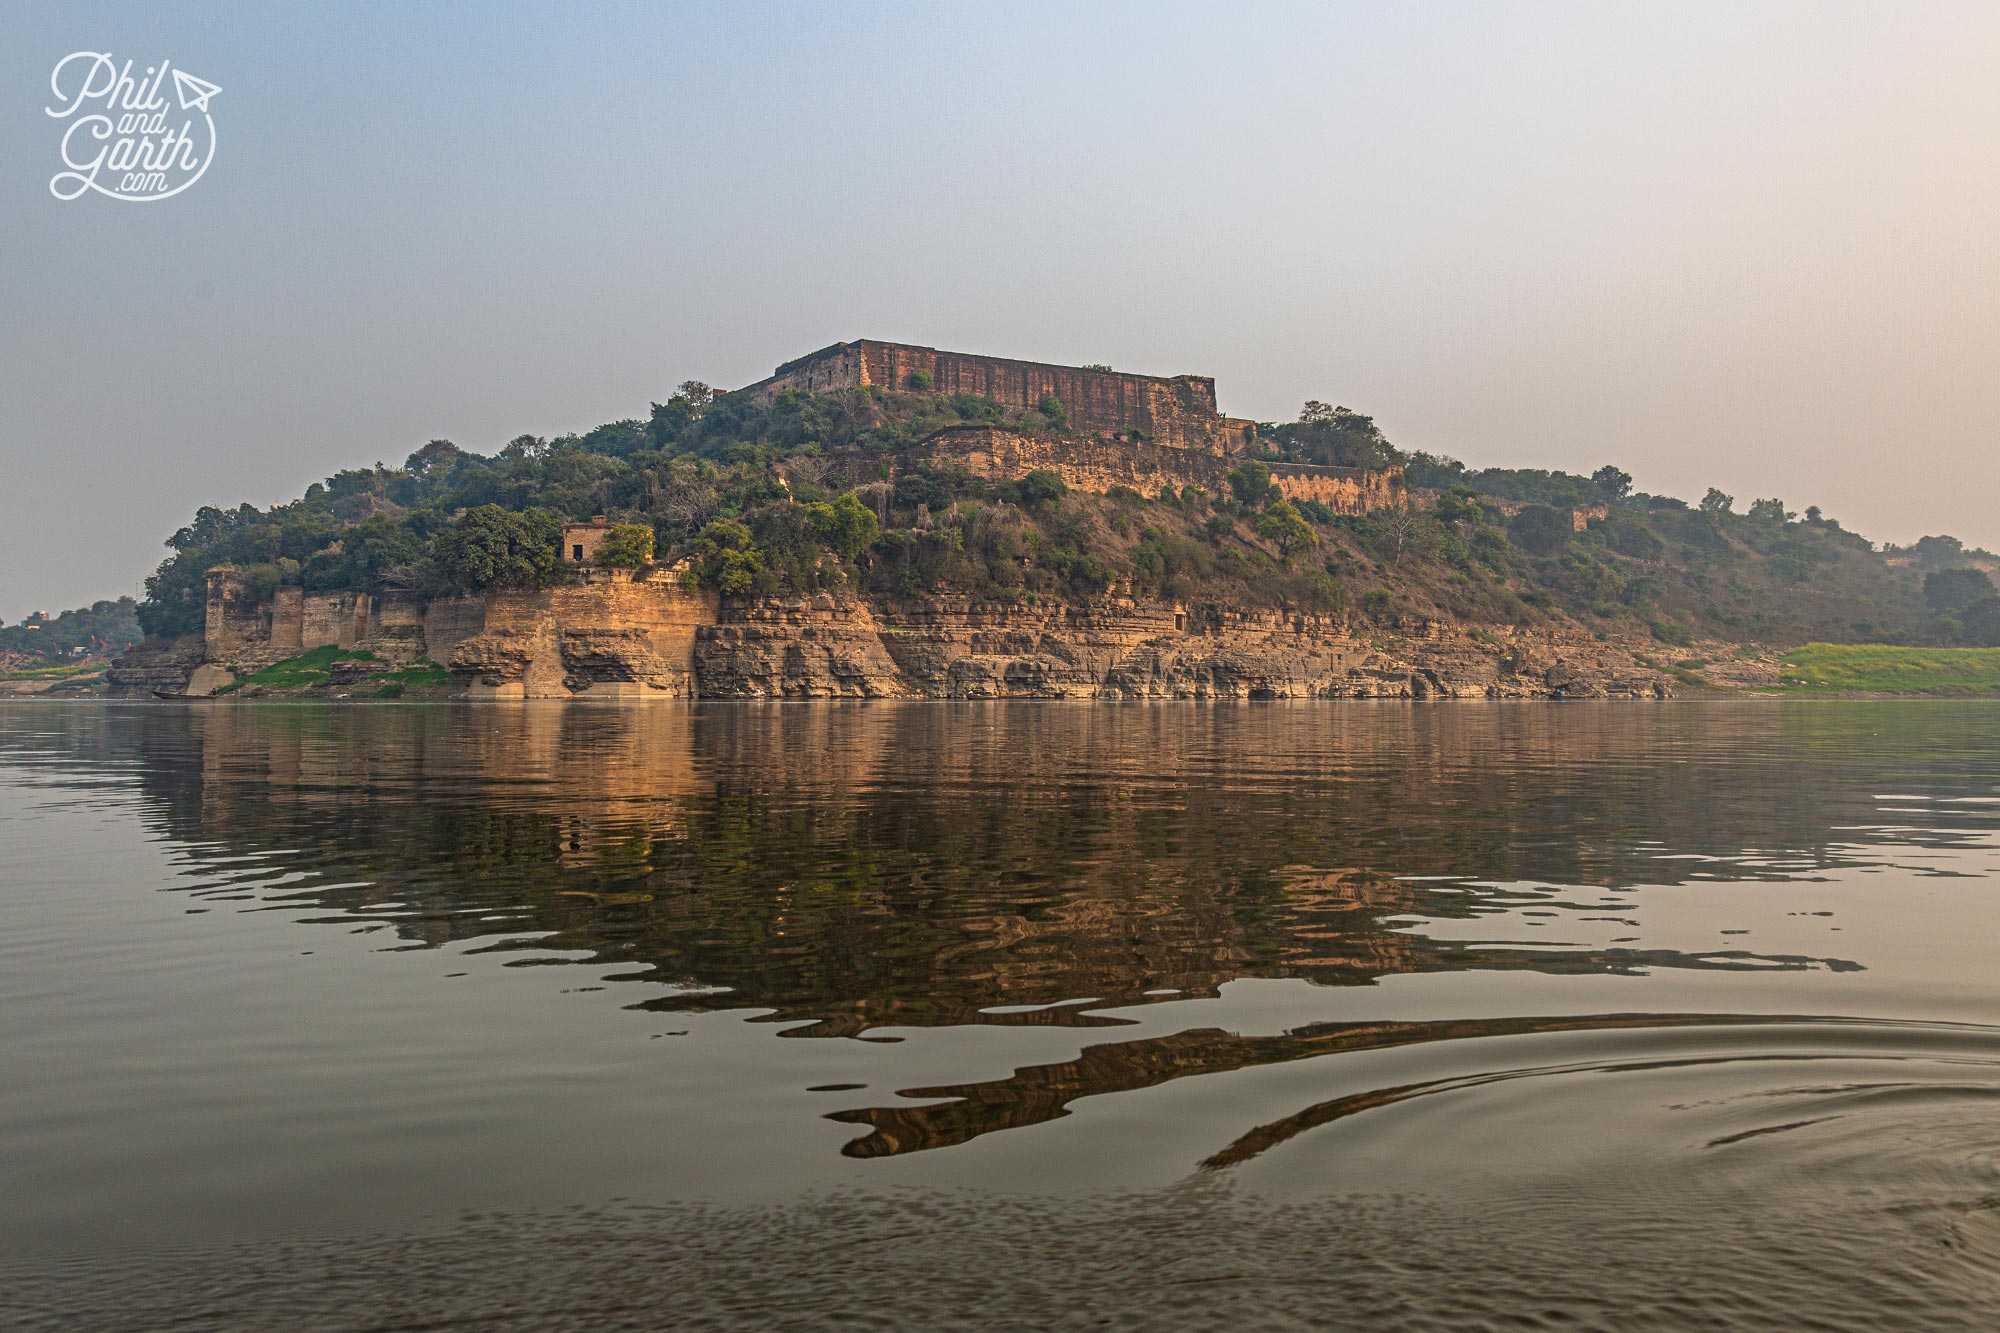 On the banks of the River Ganges, we sail pass Chunar Fort